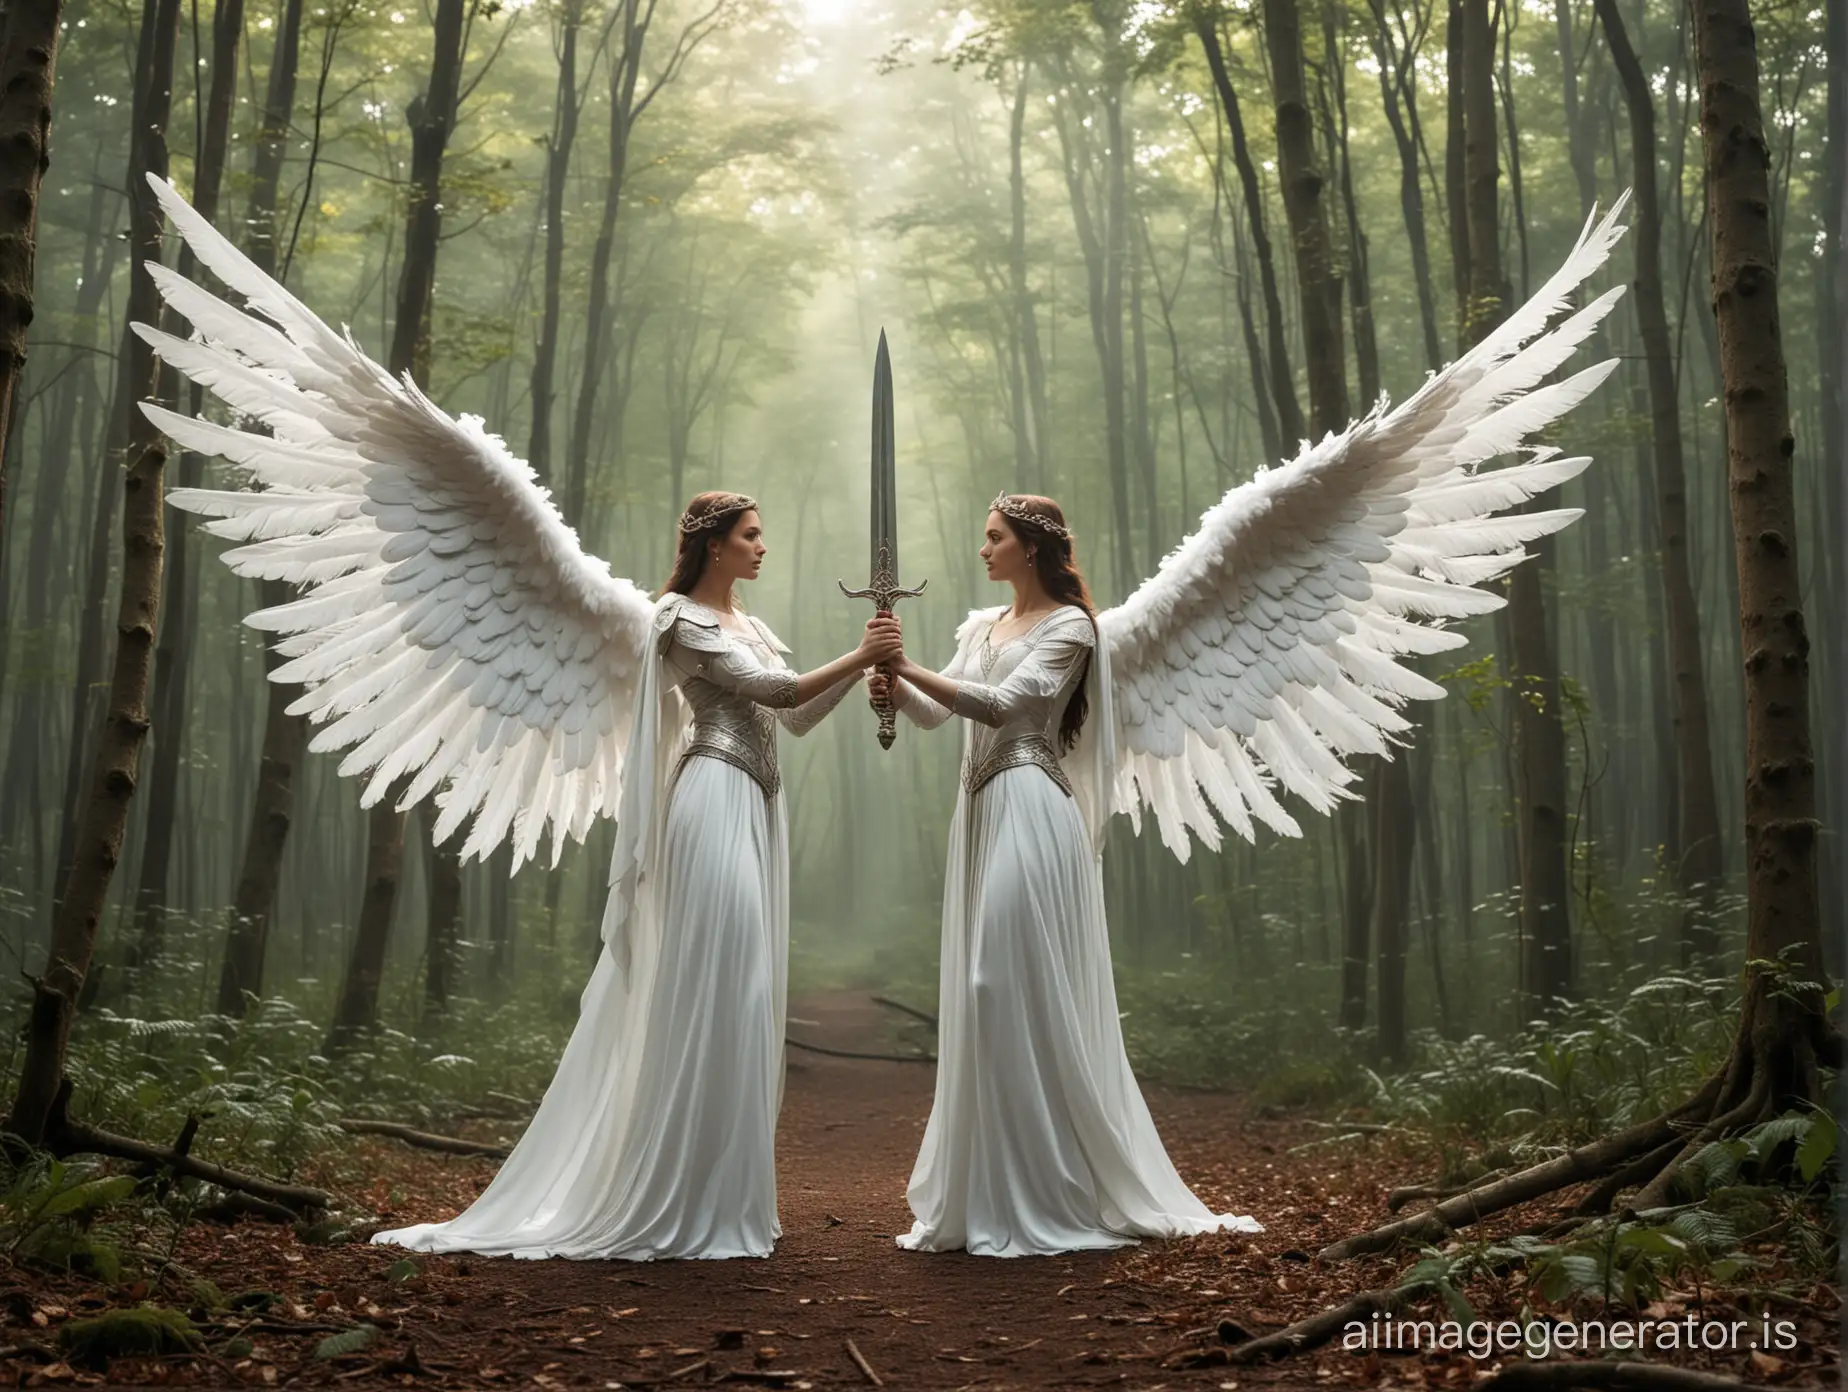 New task, against the backdrop of a bright forest, a battle takes place between a woman of the forest (Tzai is not an angel, she resembles more a woodland fairy but without wings.) AGAINST an angel woman (this woman is an angel with large white wings). (THESE ARE TWO DIFFERENT WOMEN) The woman of the forest holds a woodland scepter, and the angel woman a sword. The moment I want to capture is when the sword and scepter clash and sparks begin to fly from them.